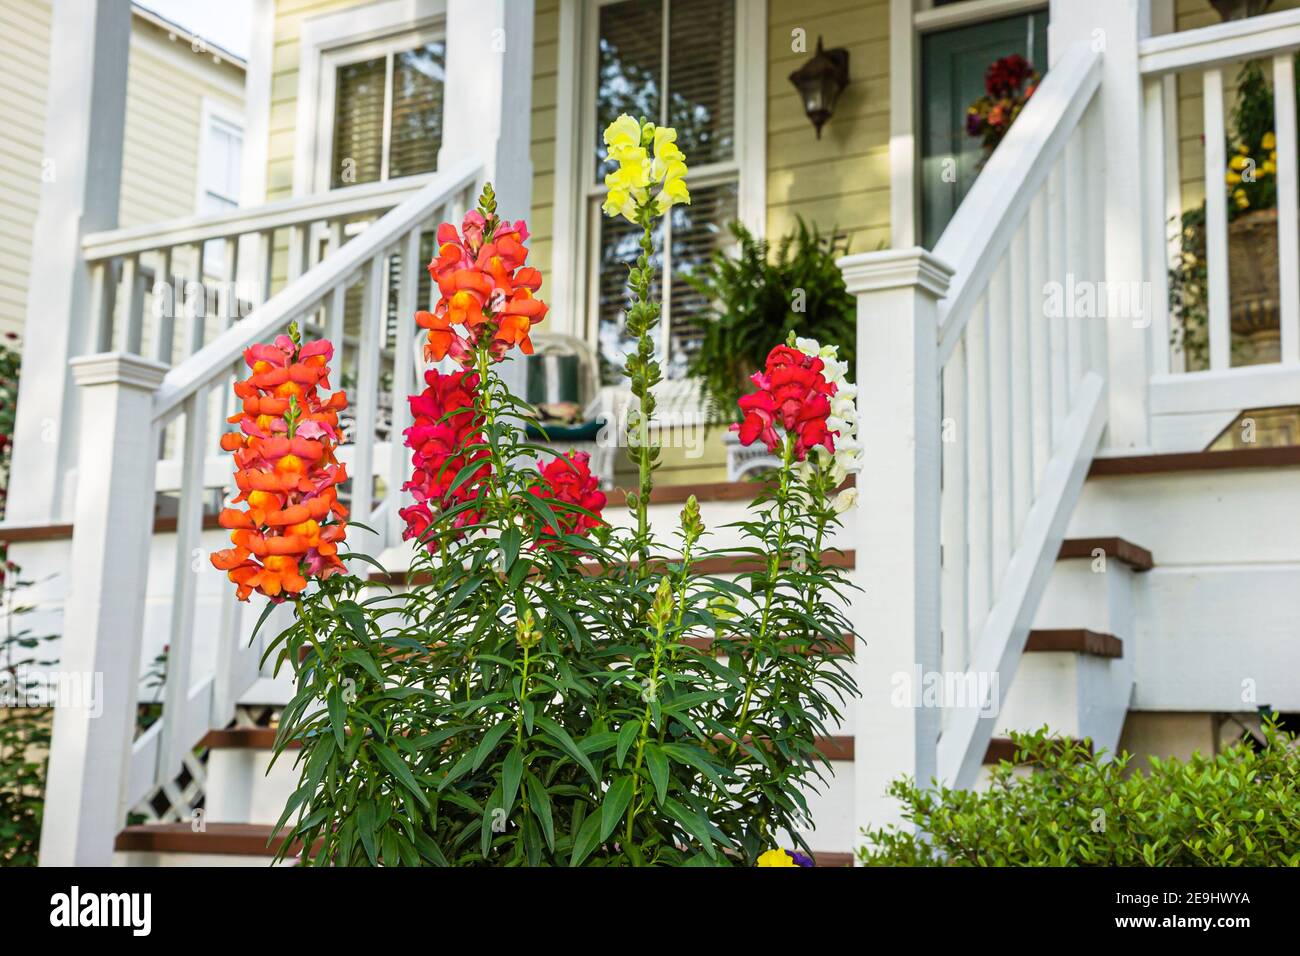 Alabama Montgomeery Pike Road The Waters planned community homes,traditional Americana architecture porch front entrance exterior flowers, Stock Photo